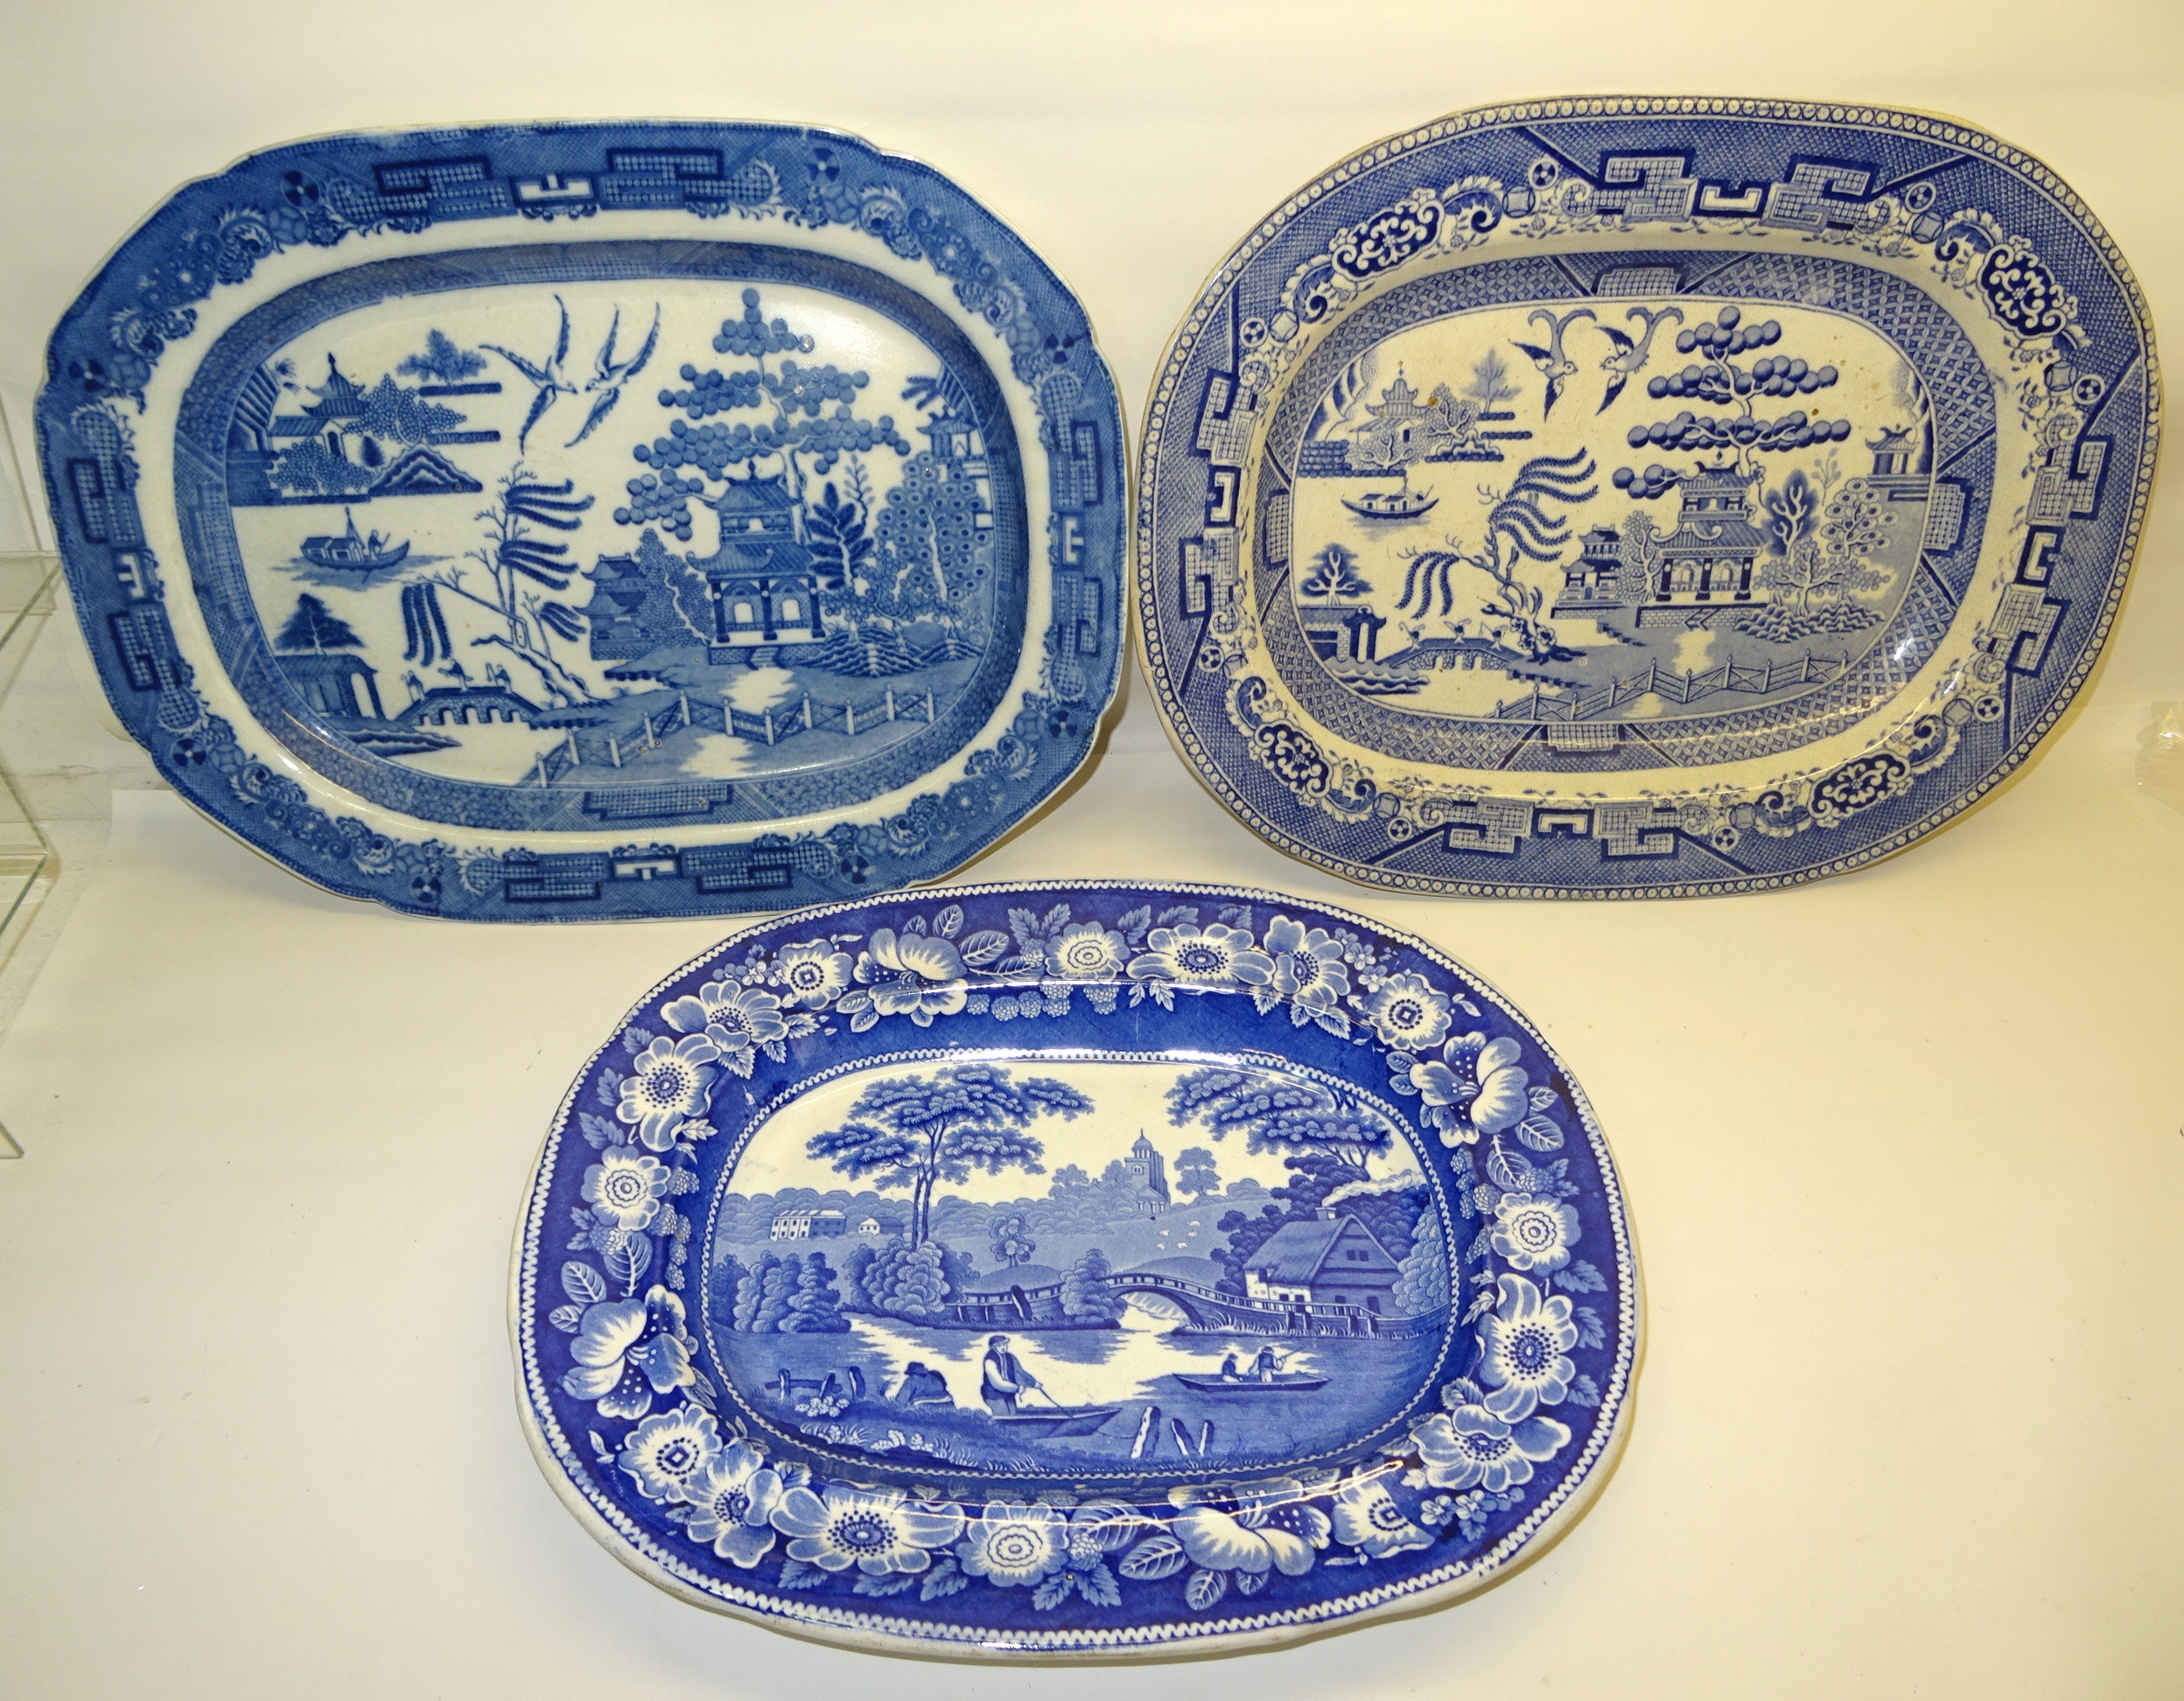 A 19th Century Wild Rose pattern earthenware Meat Plate decorated in blue and white, together with